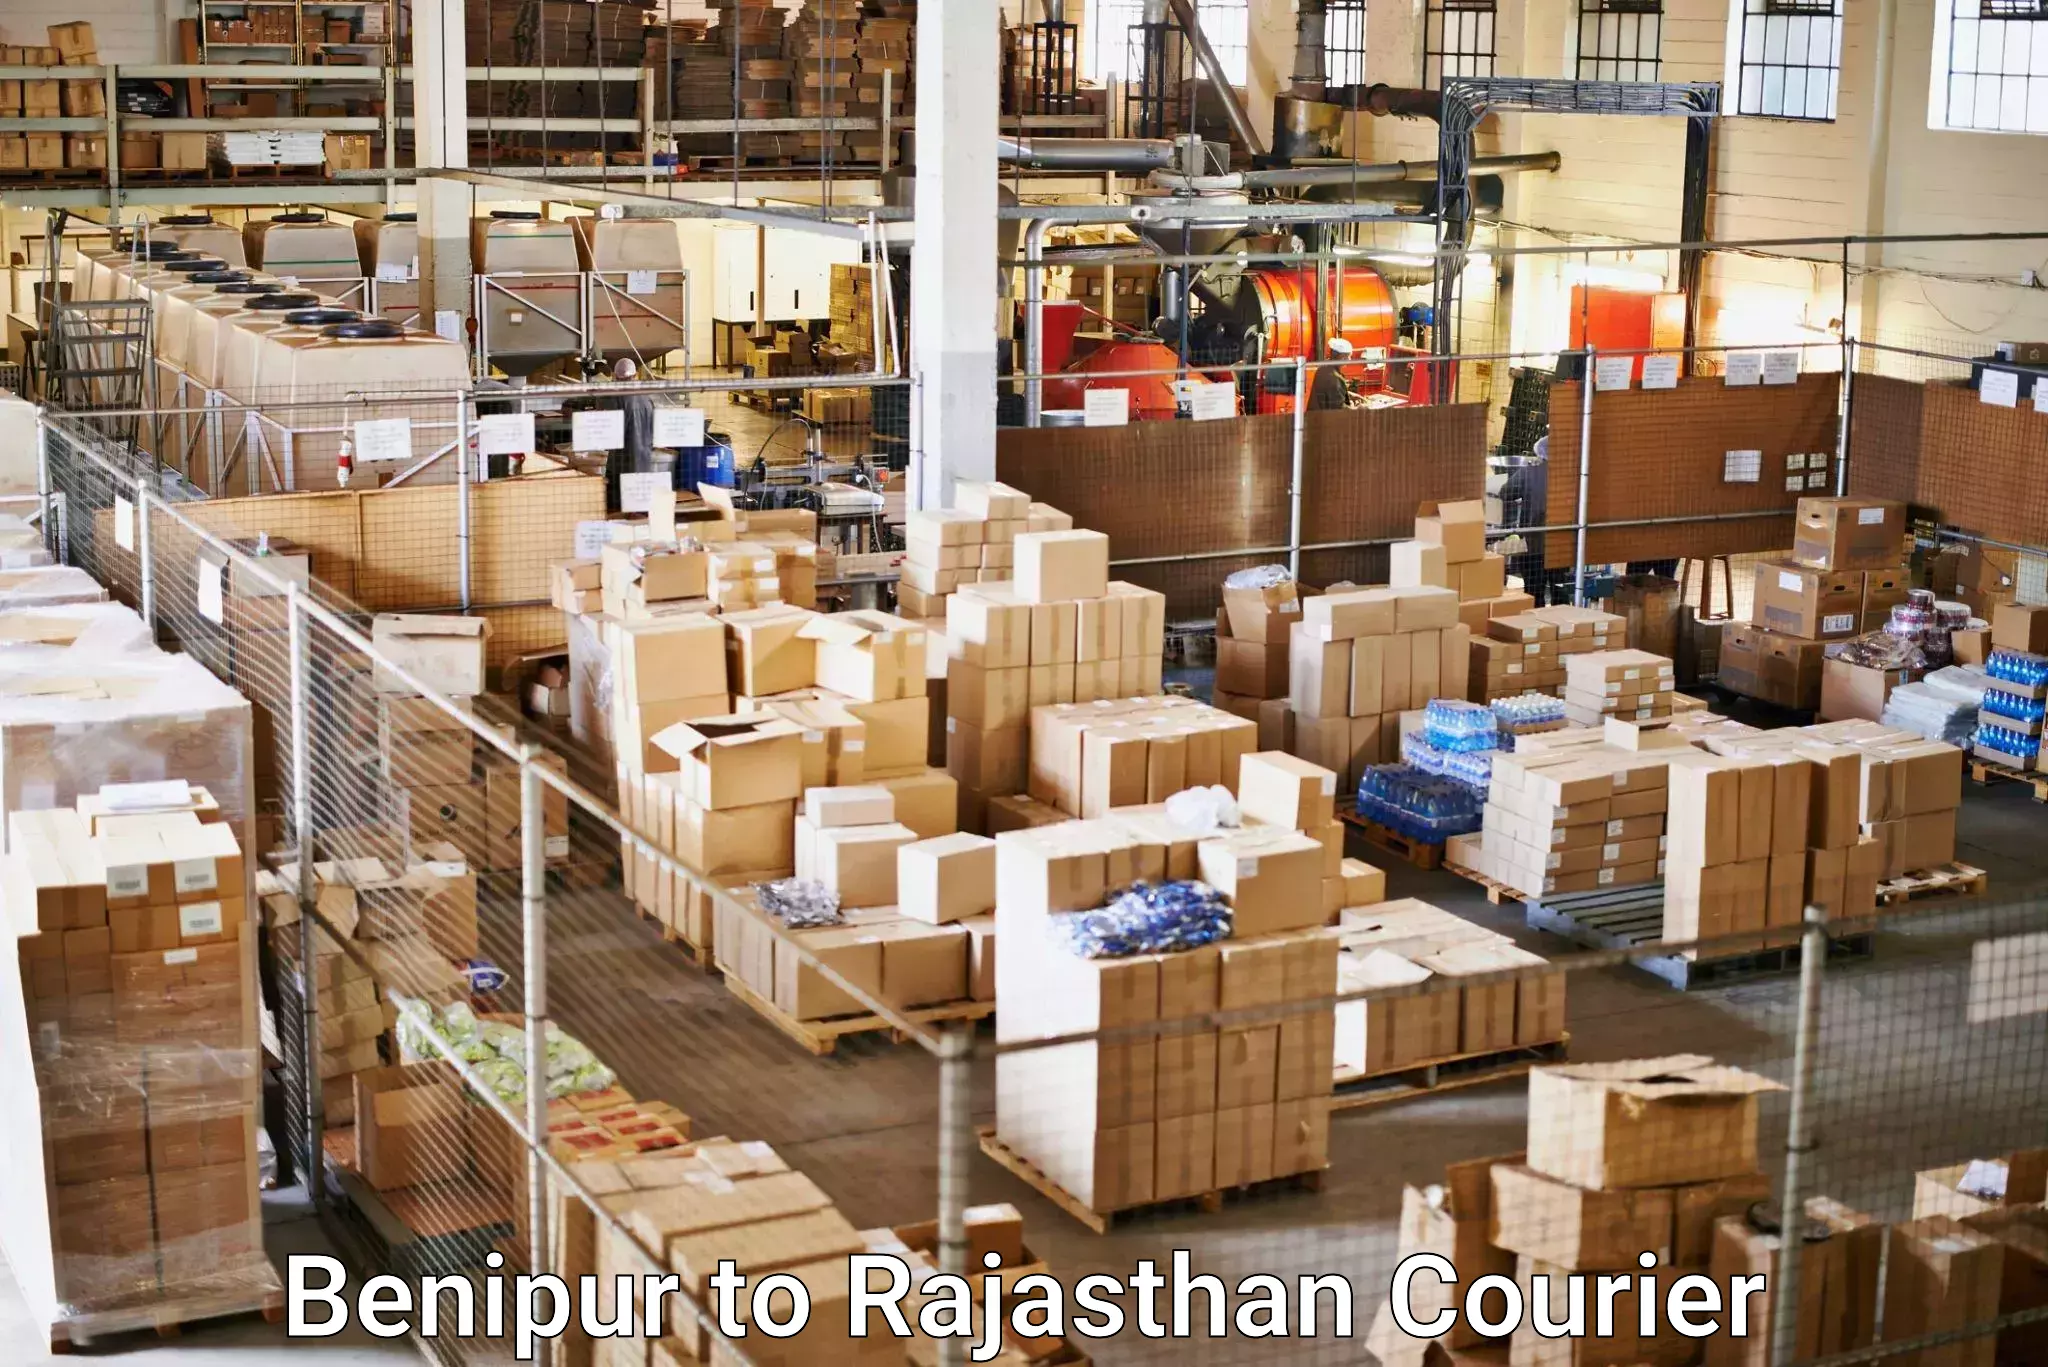 Seamless shipping experience Benipur to Birla Institute of Technology and Science Pilani